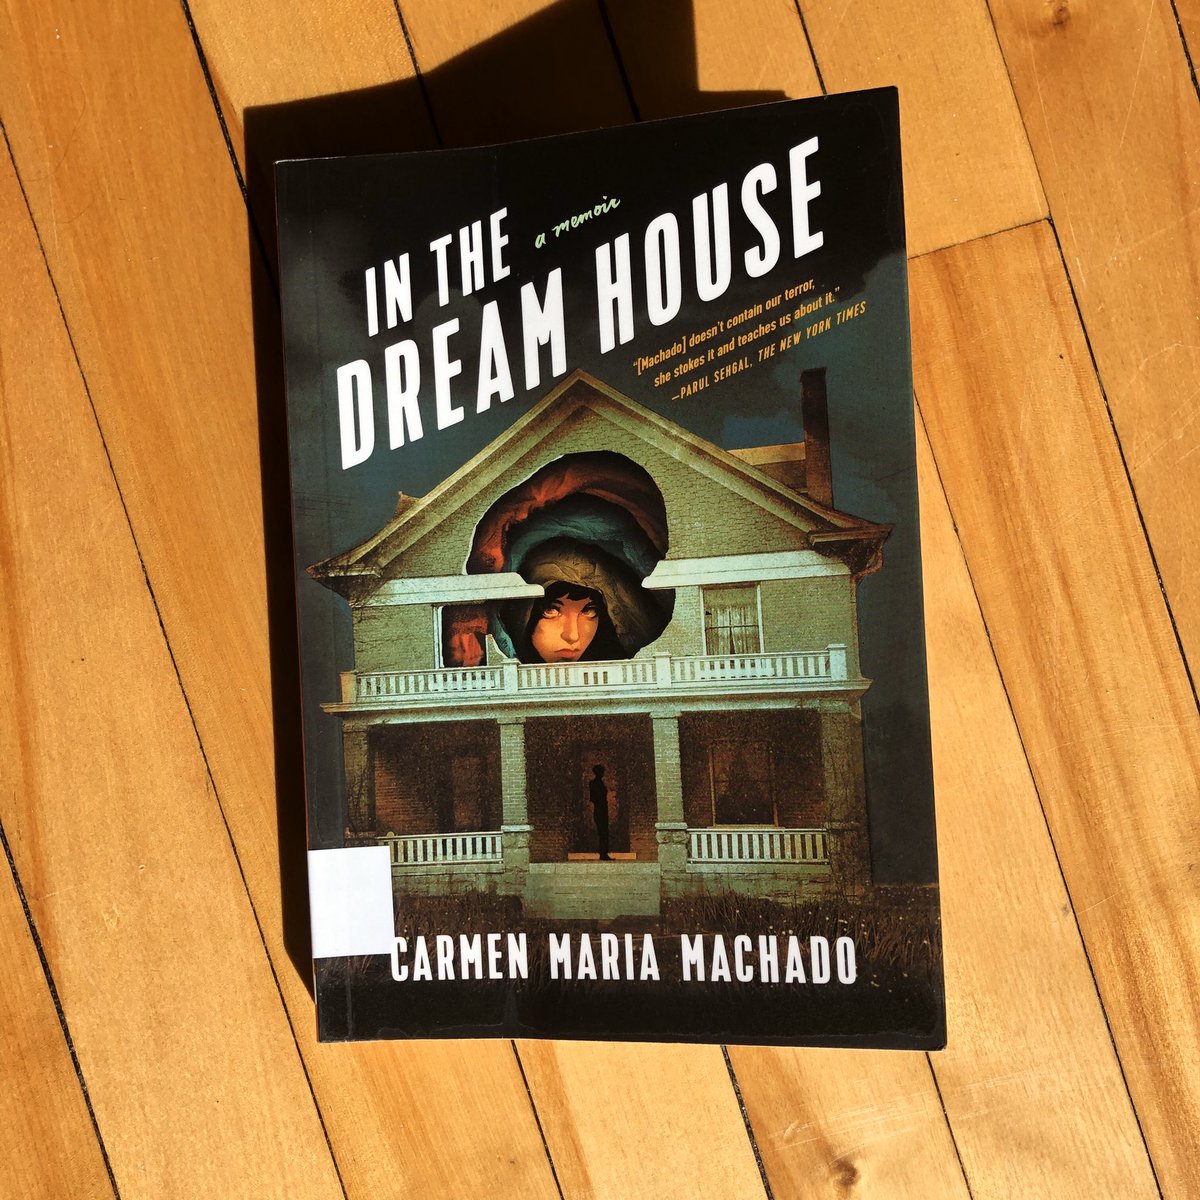 26/52In the Dream House by Carmen Maria Machado. (Yes it took me 11 days to finish another book. Hard to focus.)“The truth is, there is no better place to live than in the shadow of a beautiful, furious mountain.” #52booksin52weeks  #2020books  #booksof2020